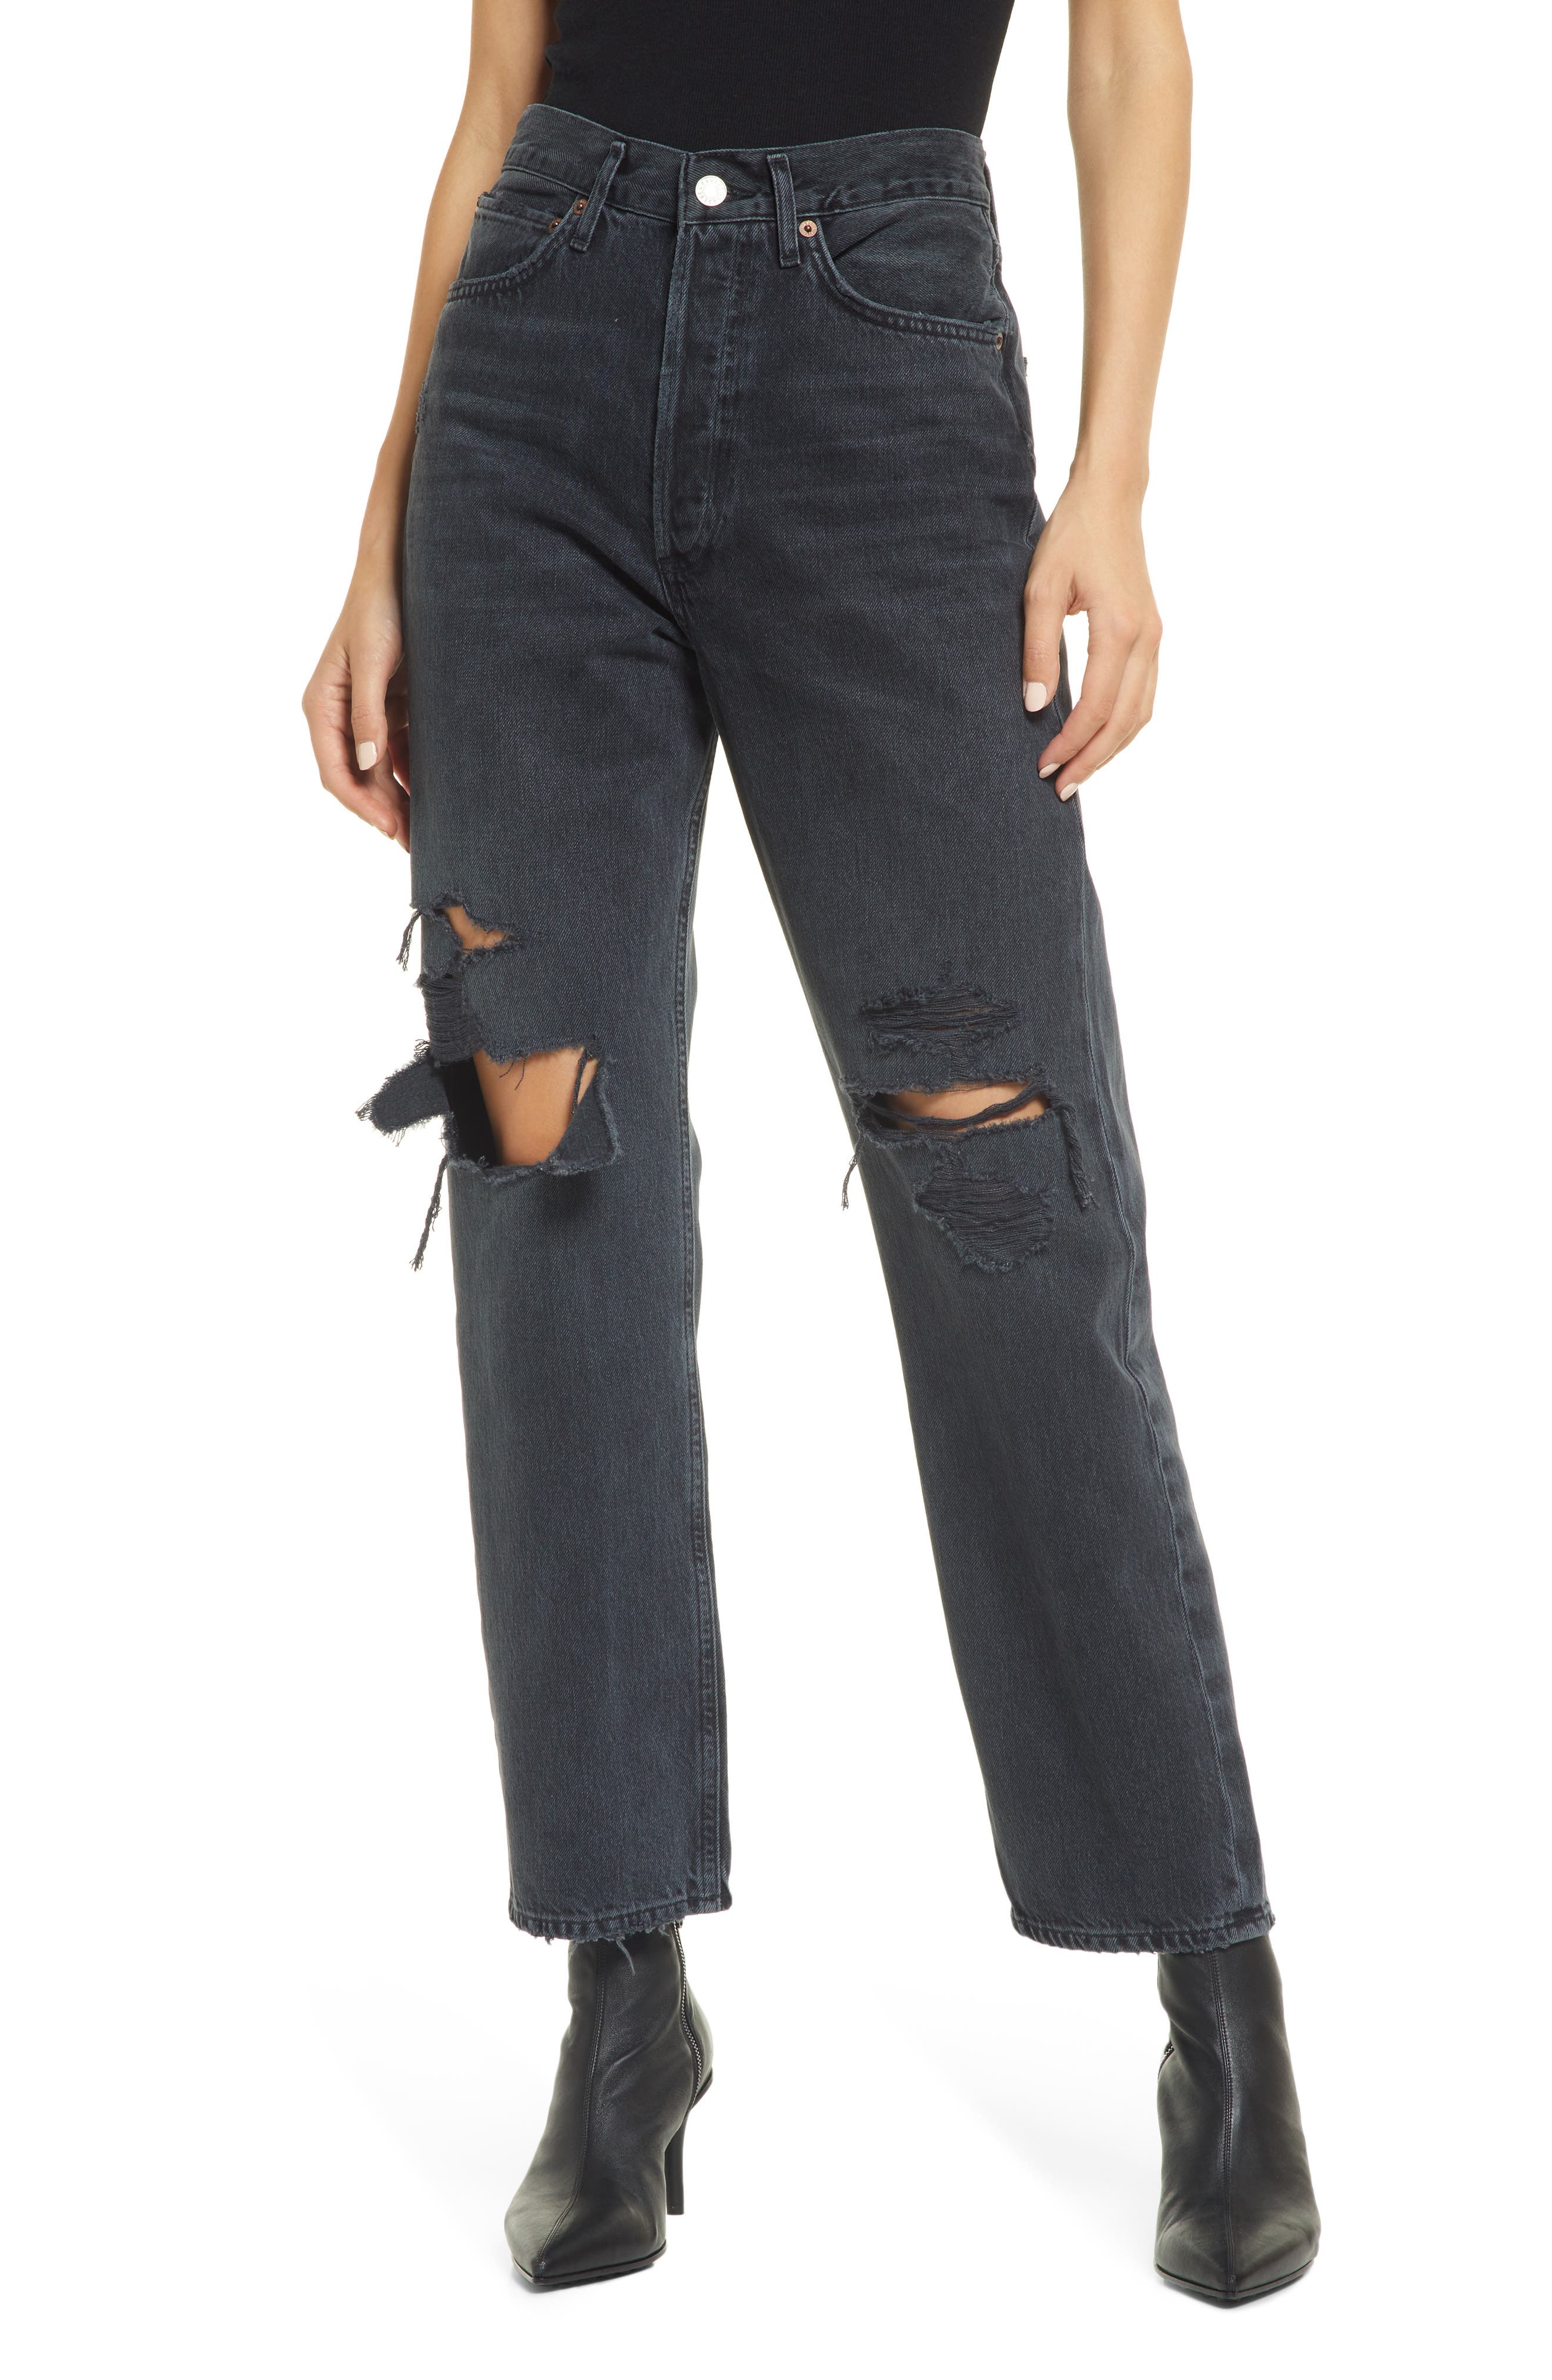 AGOLDE '90s Ripped Loose Fit Jeans in Washed Black With Damage at Nordstrom, Size 27